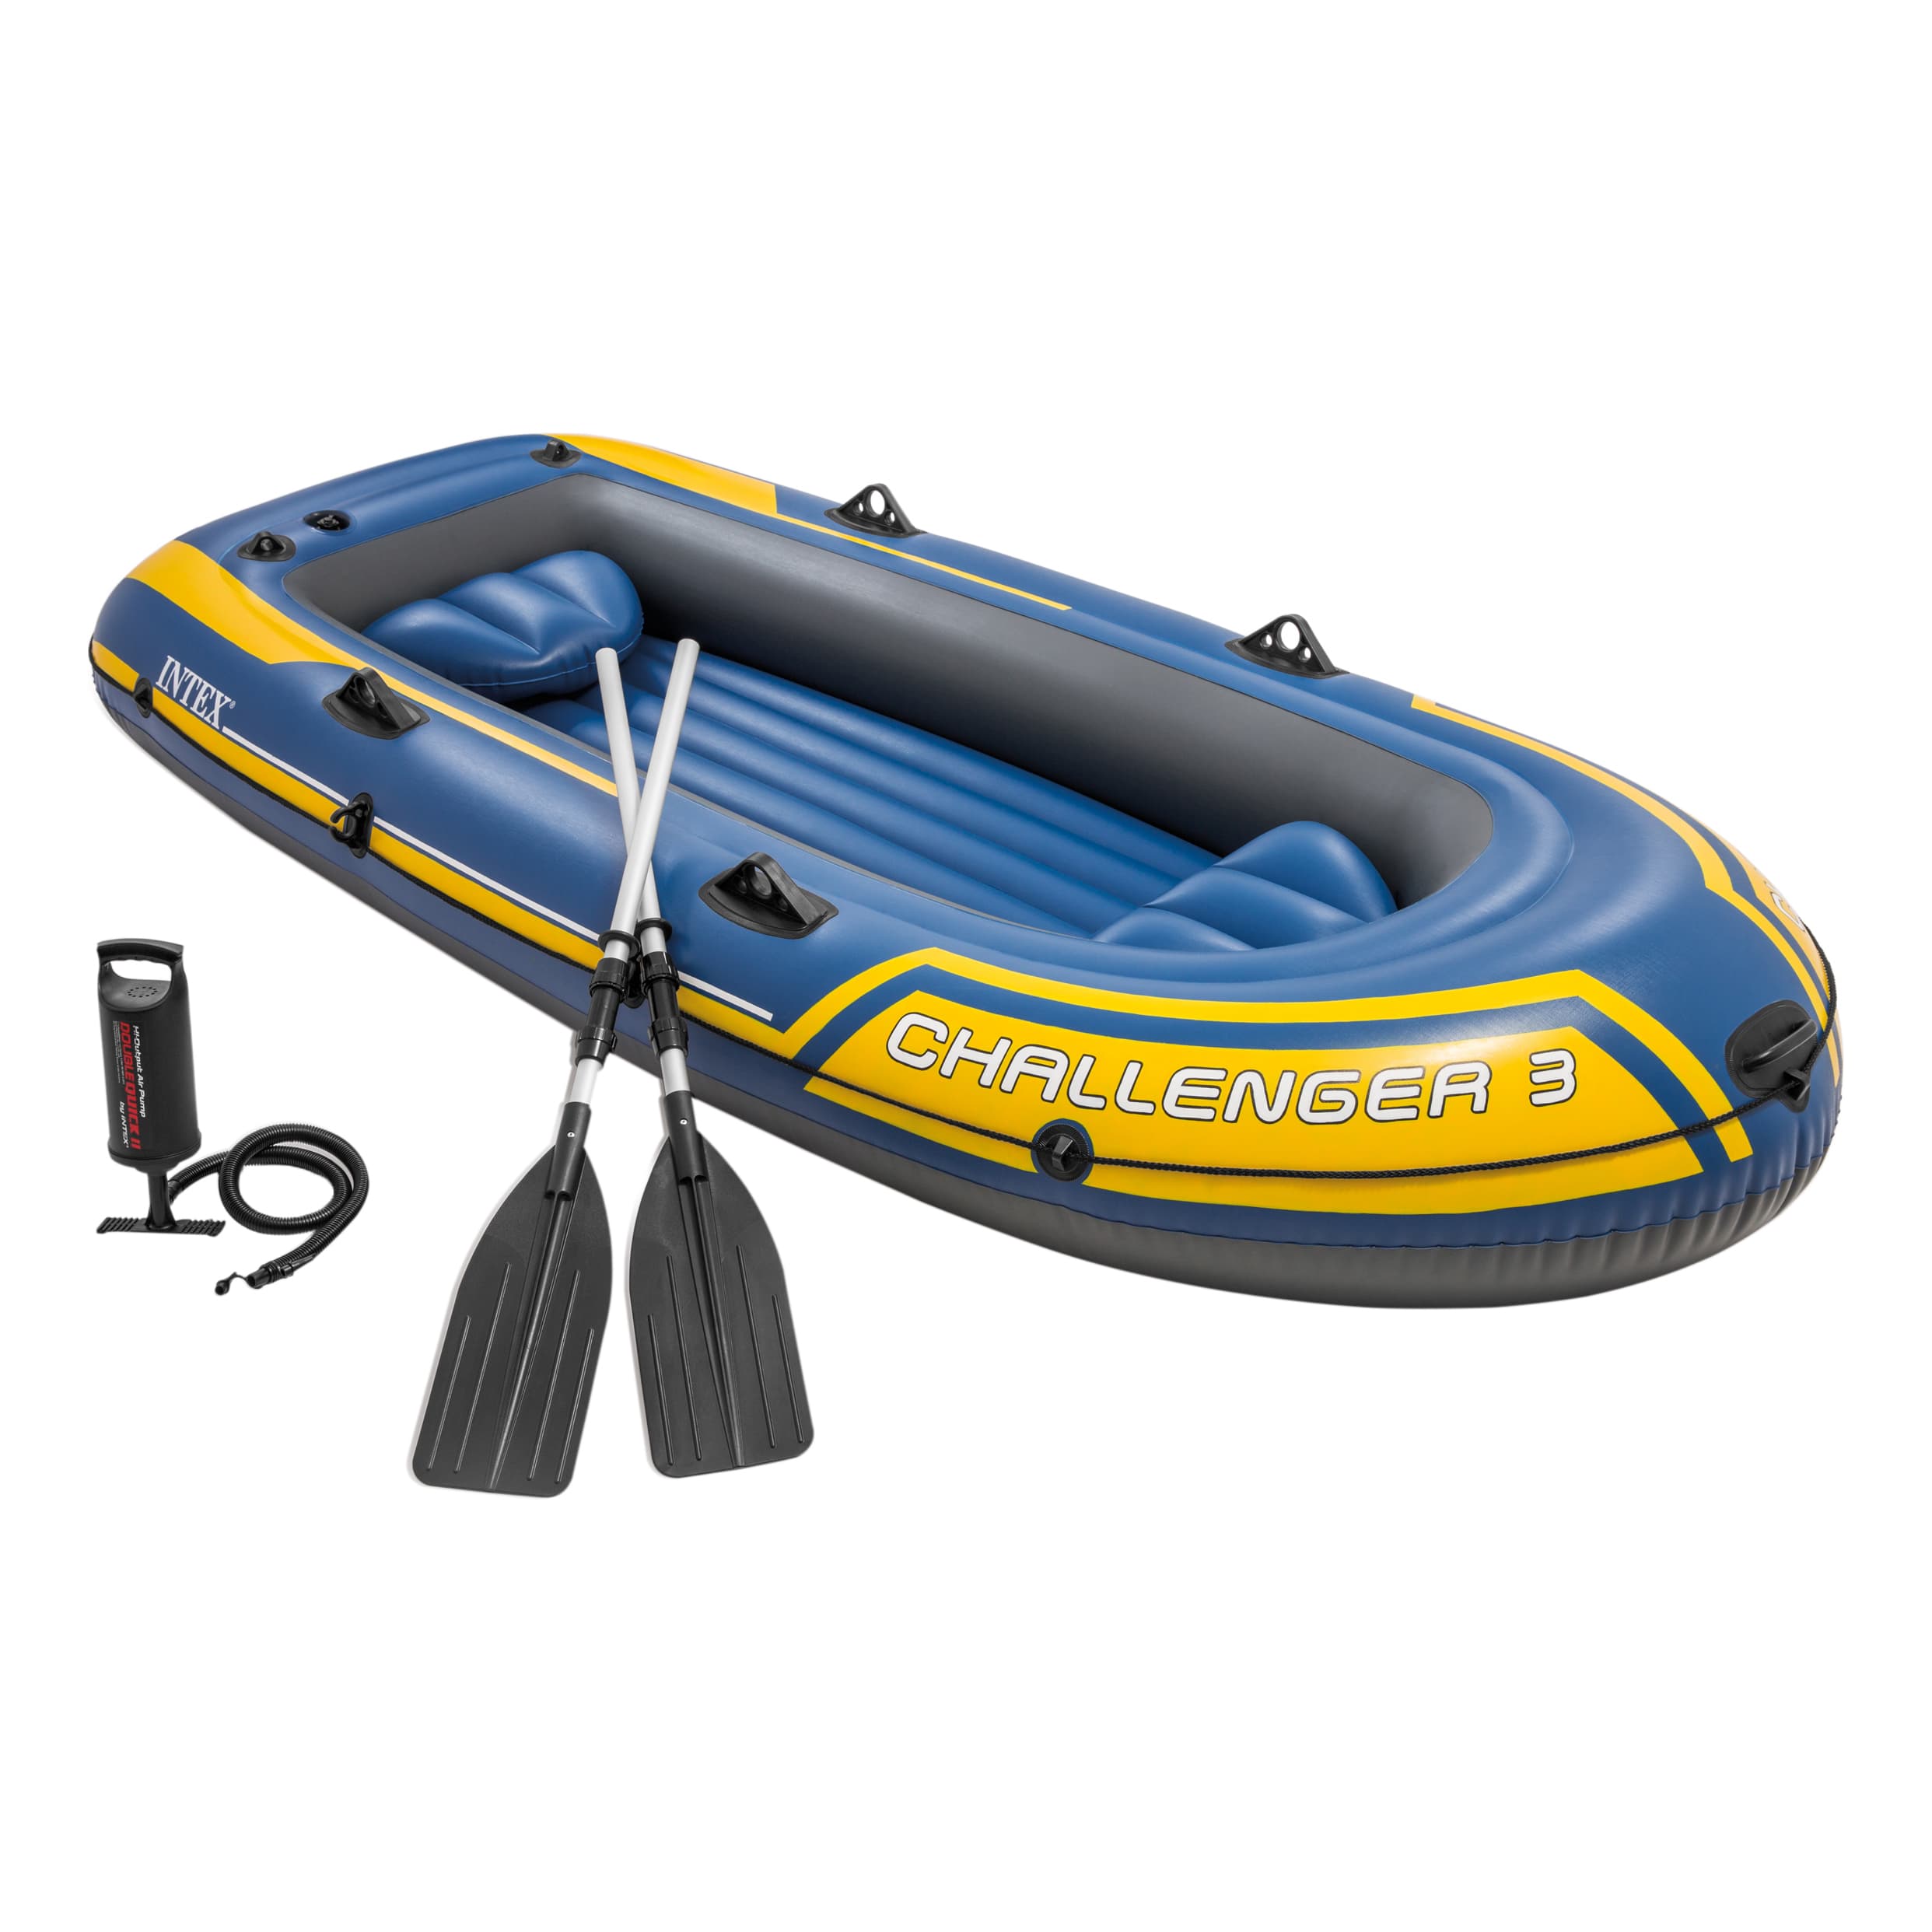 Intex Challenger 3 Inflatable Boat Set With Pump And Oars 68370EP